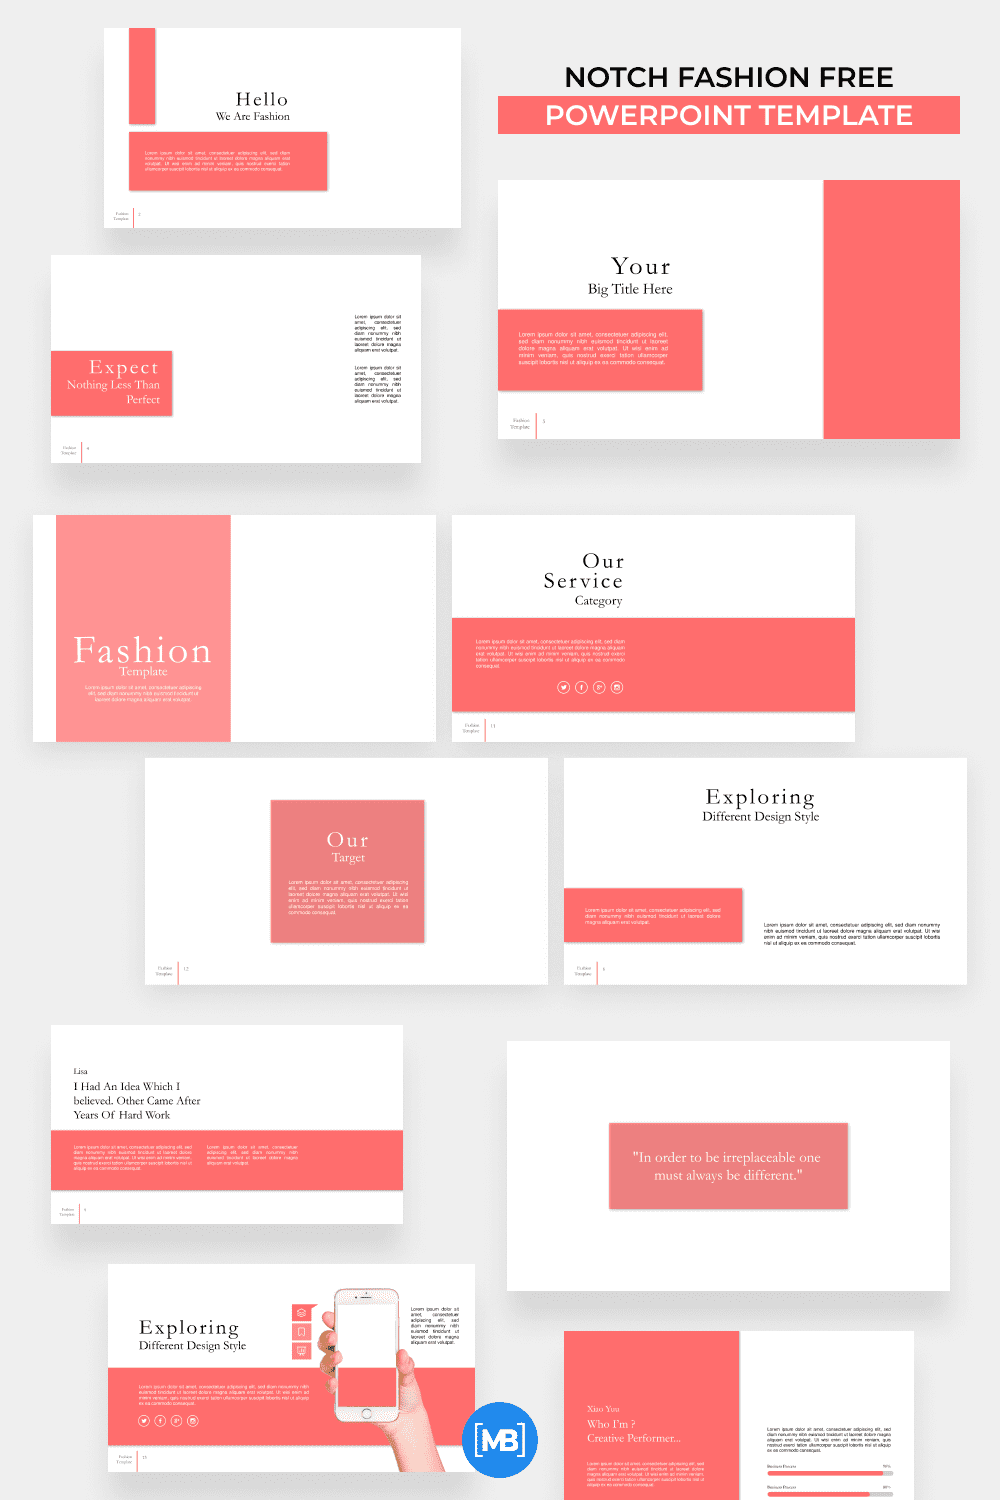 Notch Fashion Free PowerPoint Template.